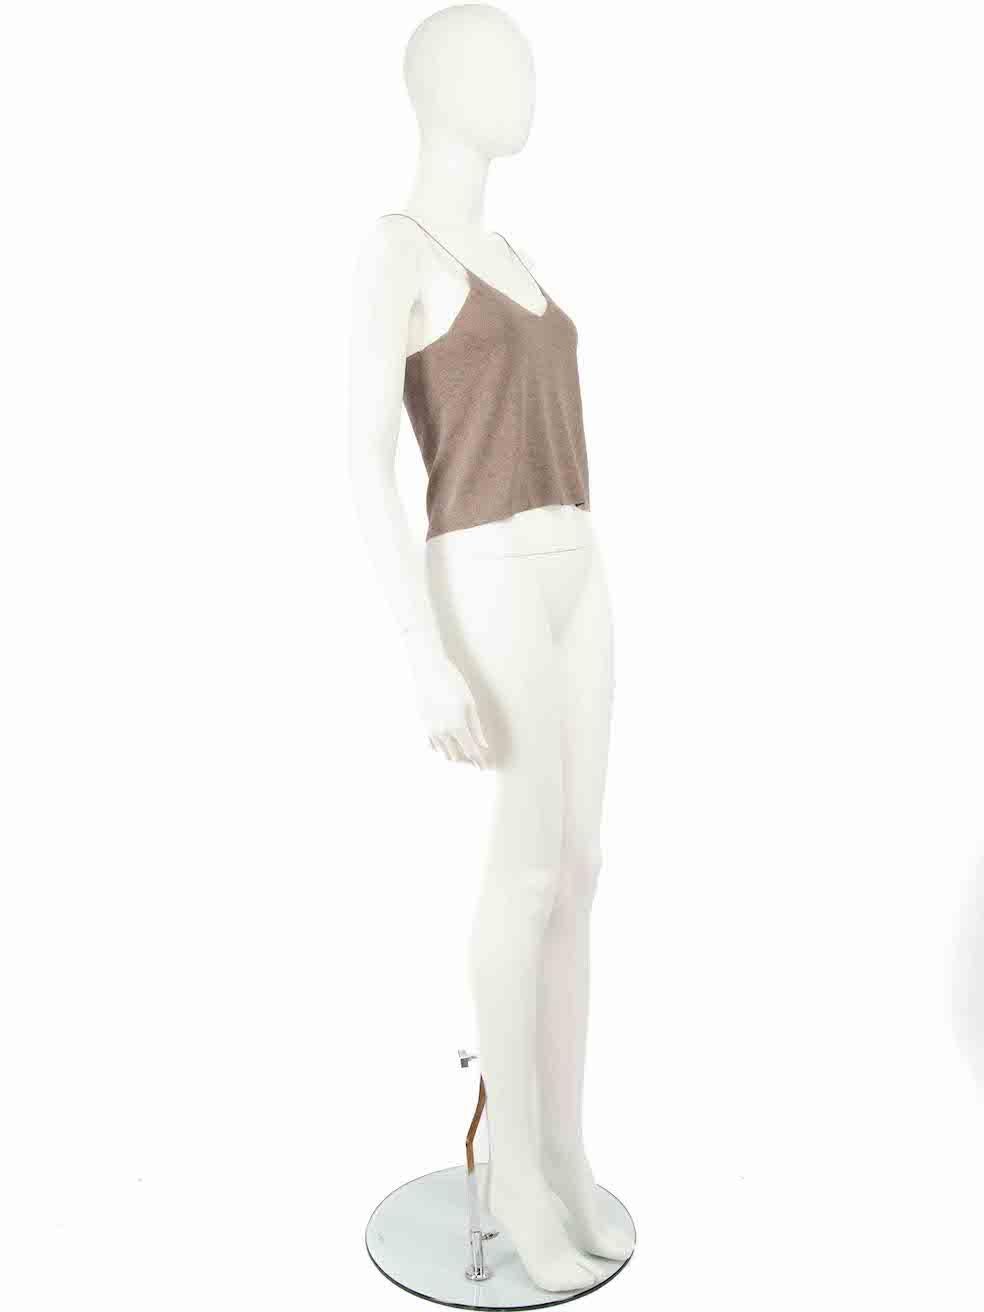 CONDITION is Very good. Minimal wear to top is evident. Minimal wear to the left underarm with pulls to the knit on this used T Alexander Wang designer resale item.
 
 Details
 Brown
 Viscose
 Tank top
 Cropped length
 V neckline
 Fine knitted and